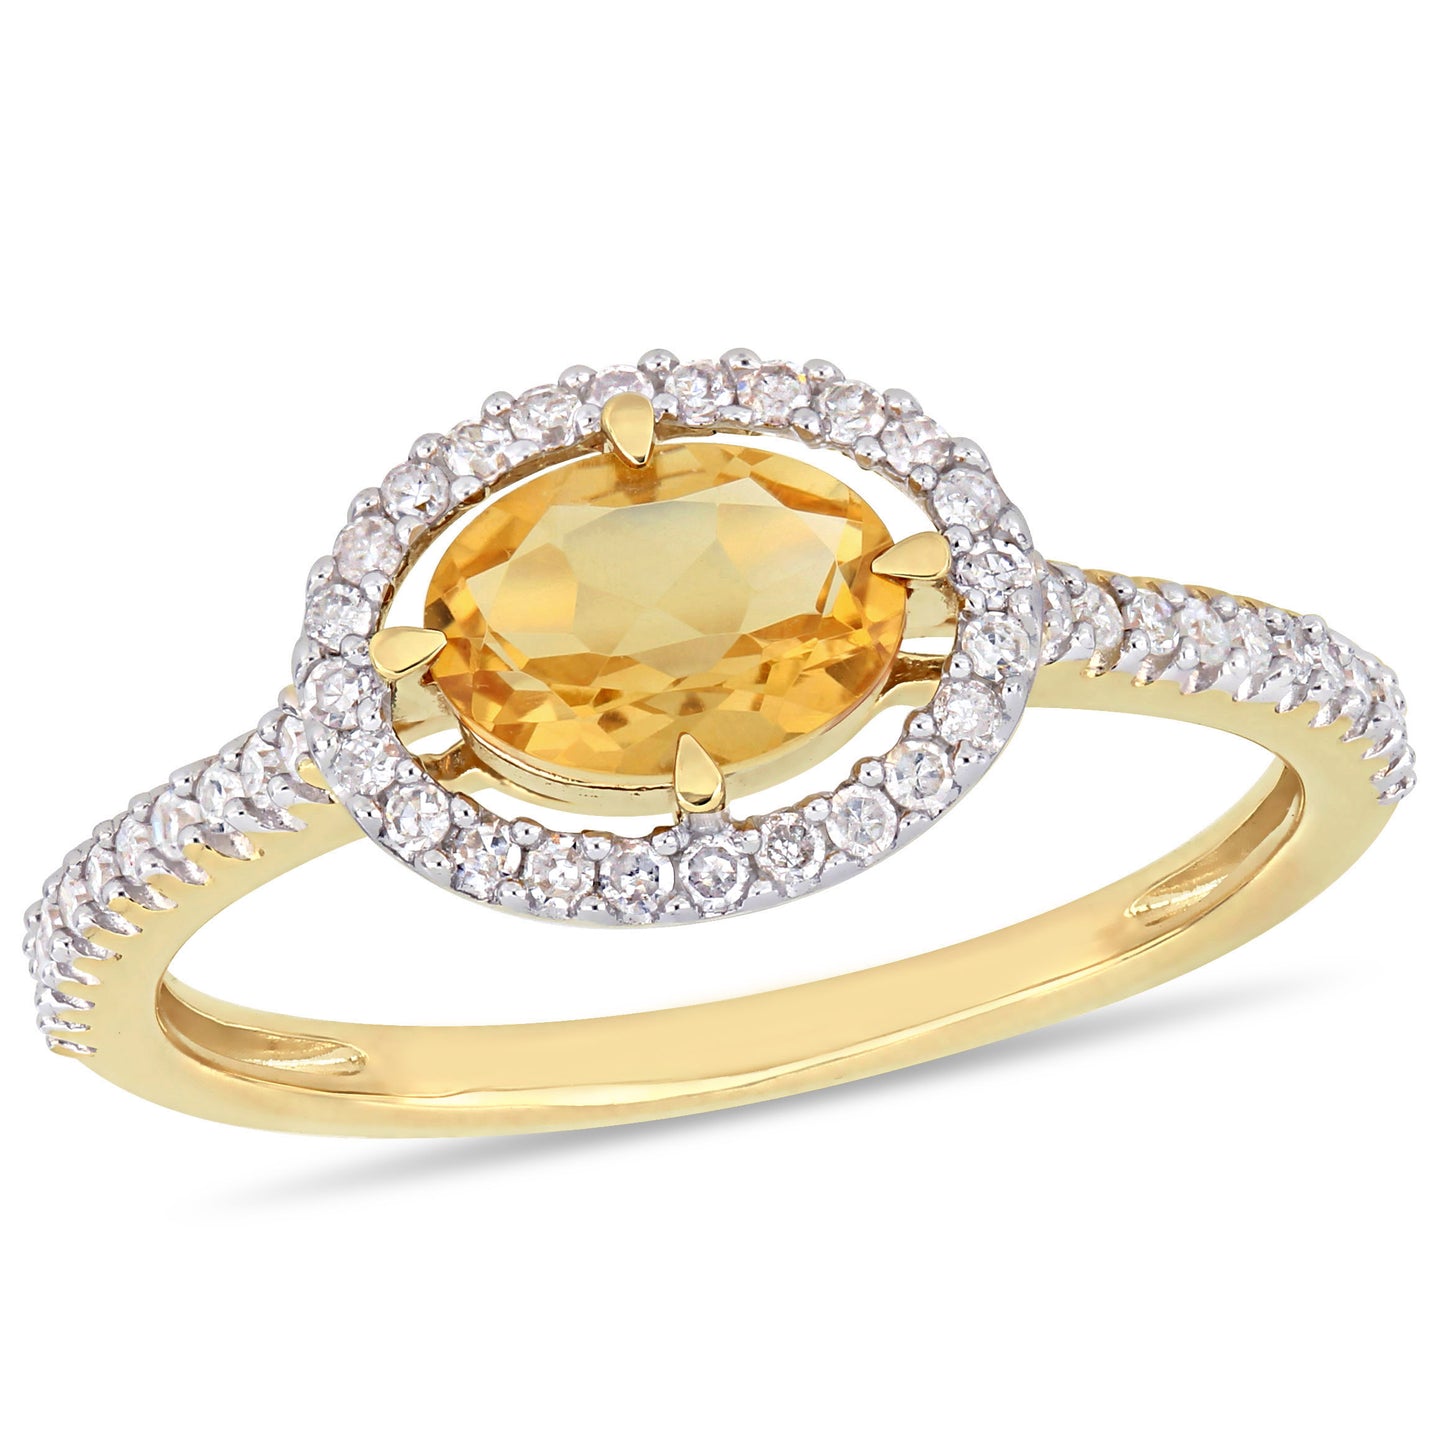 East West Floating Citrine & Diamond Halo Ring in 10k Yellow Gold